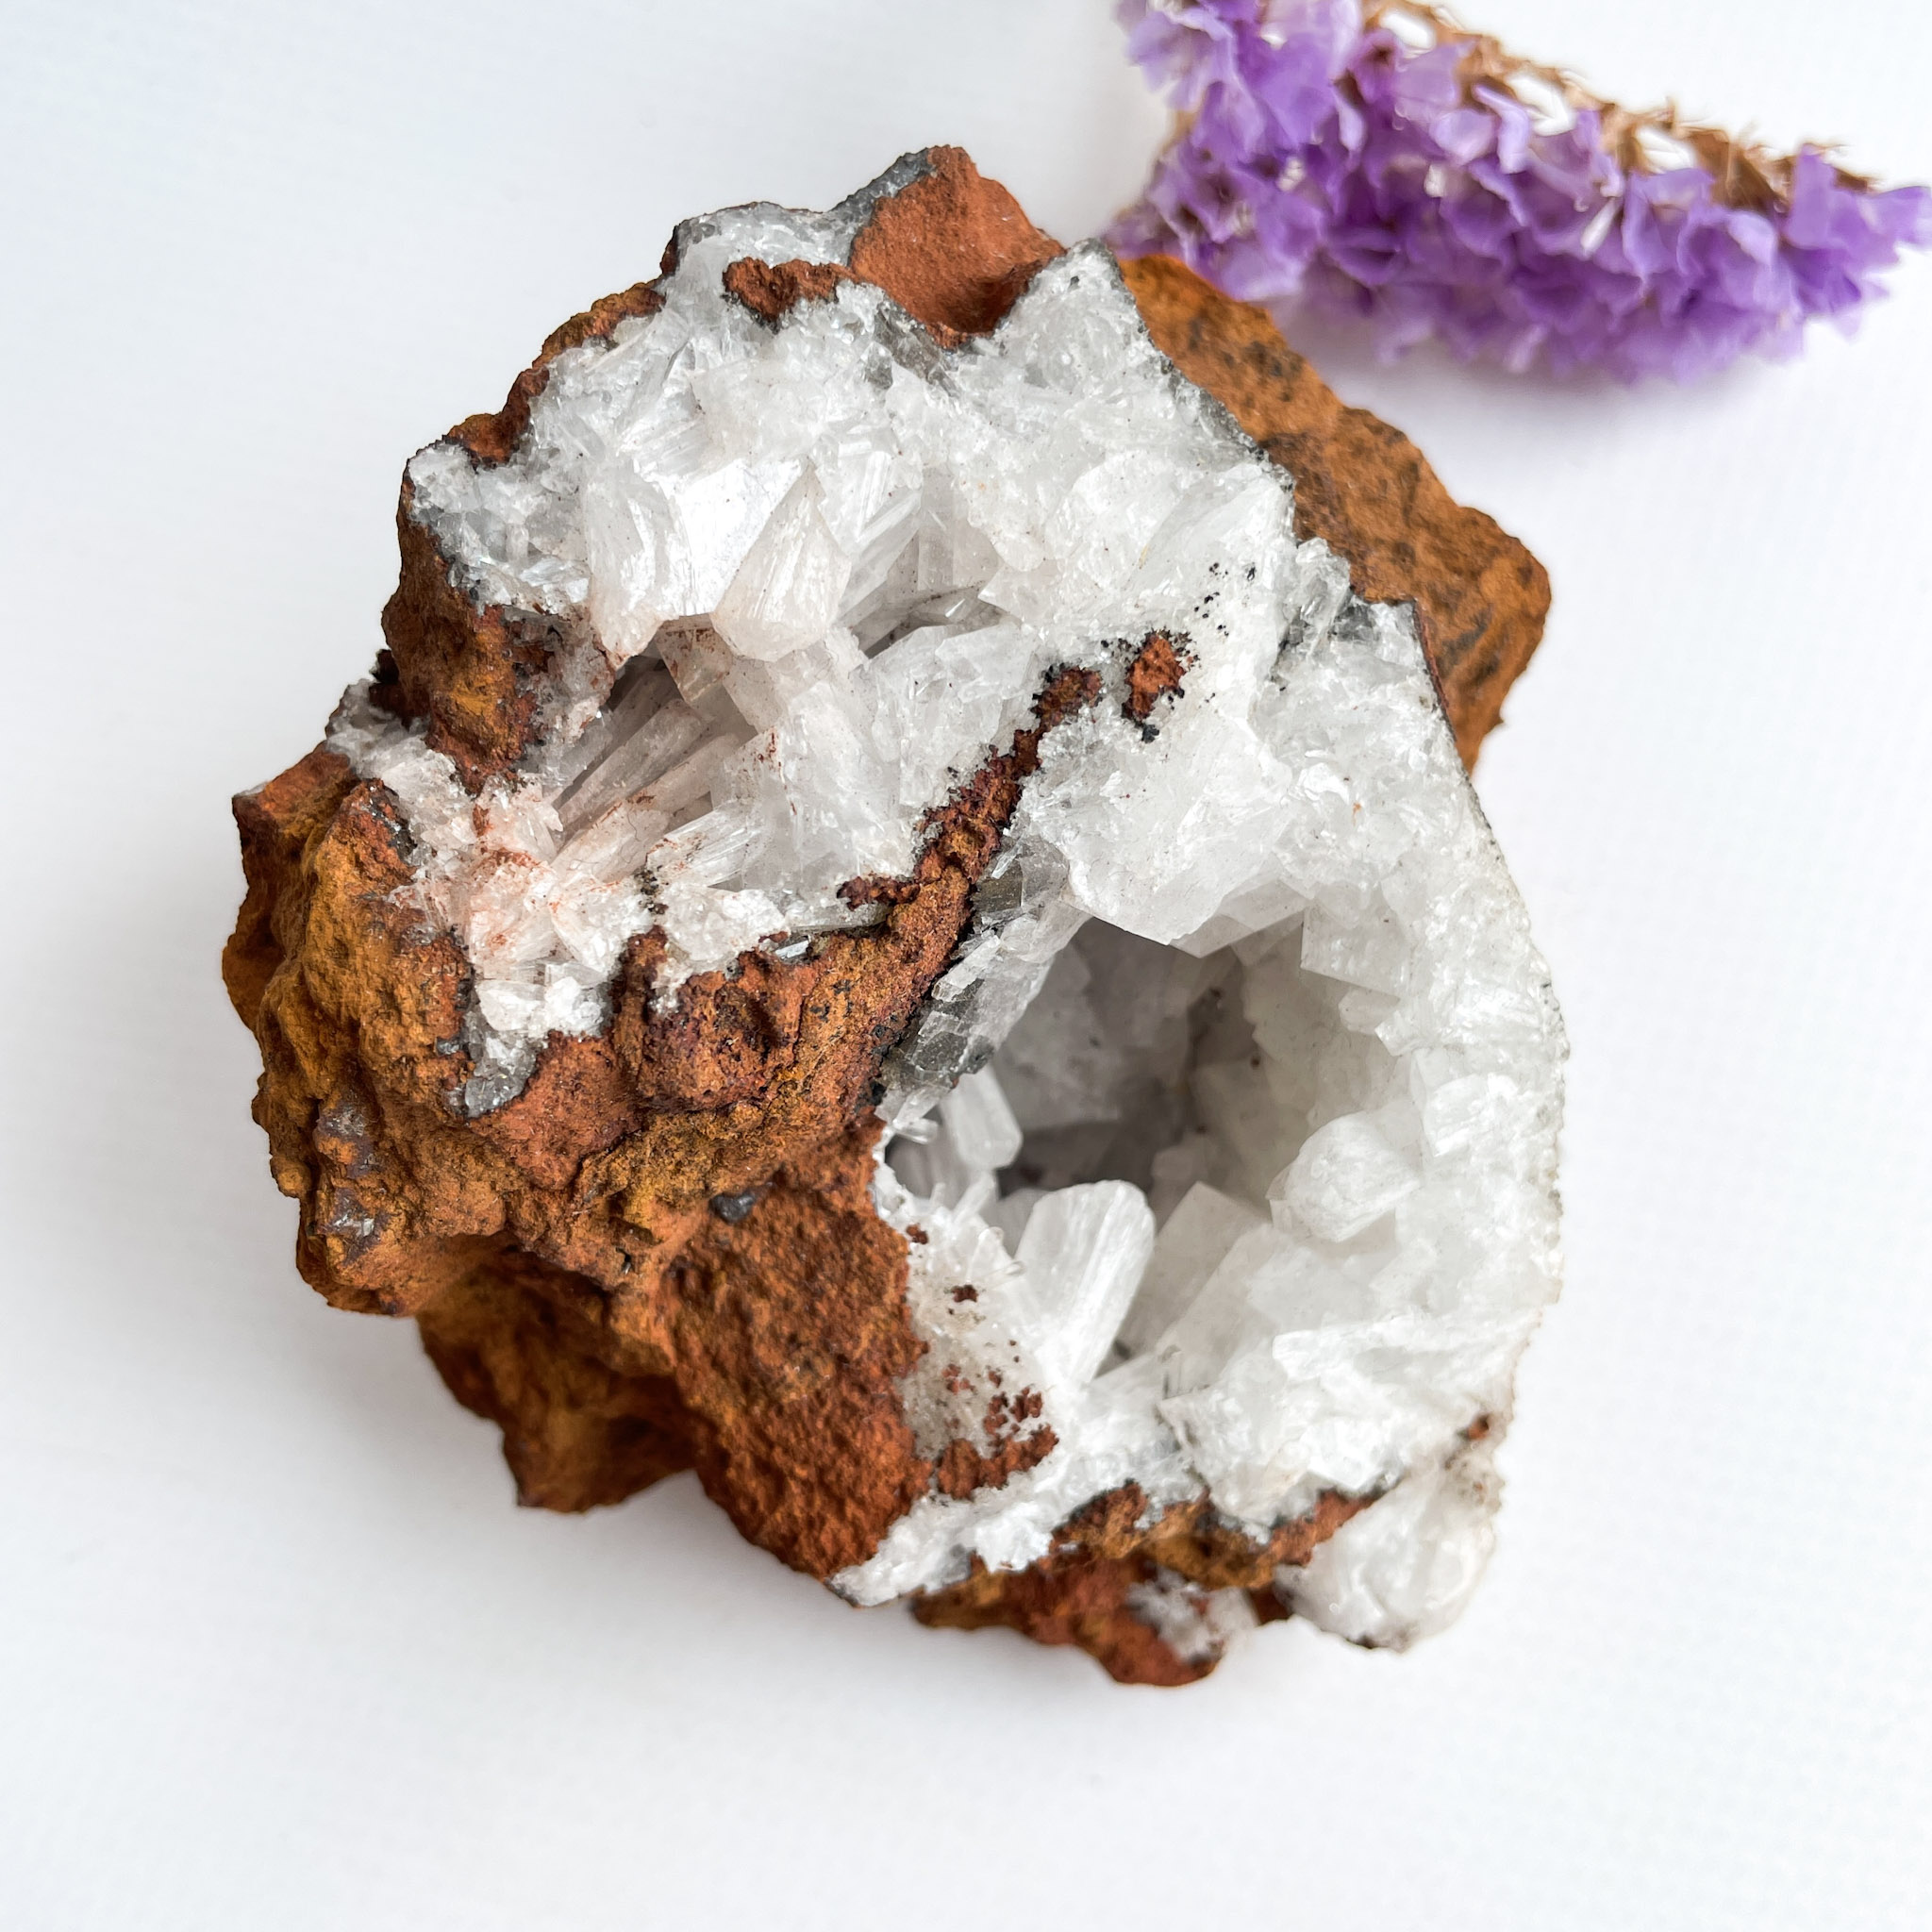 A geode with clear quartz crystals inside, surrounded by its rough brown exterior, placed on a white surface next to a small purple dried flower.